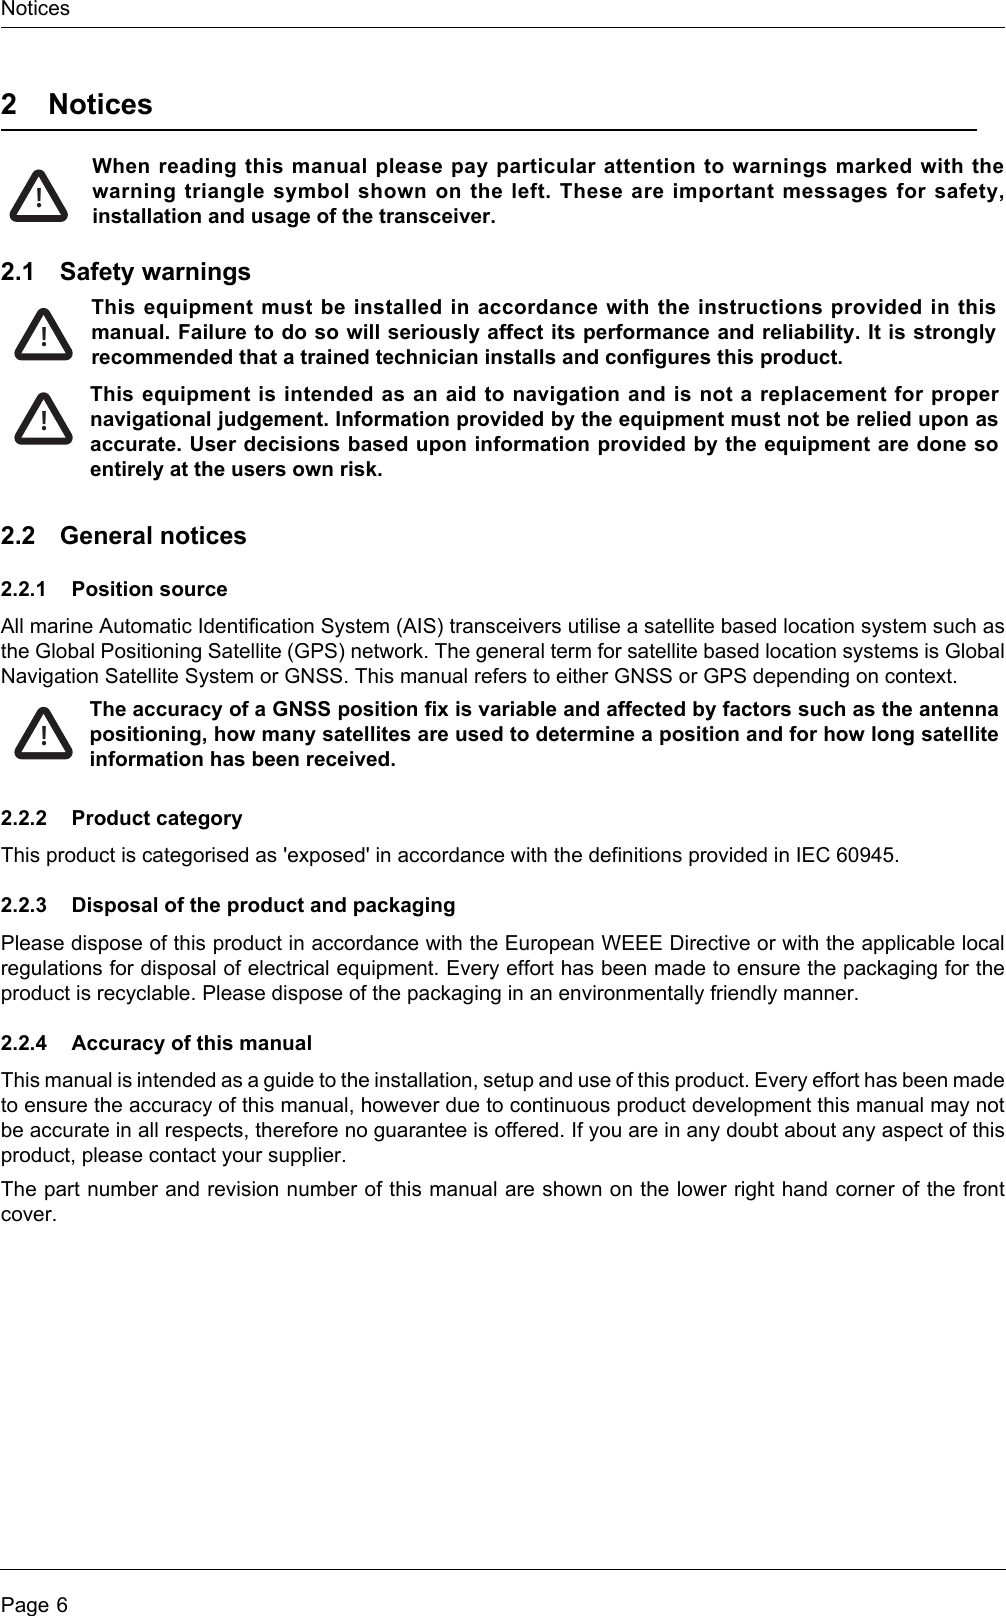 NoticesPage 62NoticesWhen reading this manual please pay particular attention to warnings marked with the warning triangle symbol shown on the left. These are important messages for safety, installation and usage of the transceiver.2.1 Safety warnings2.2 General notices2.2.1 Position sourceAll marine Automatic Identification System (AIS) transceivers utilise a satellite based location system such as the Global Positioning Satellite (GPS) network. The general term for satellite based location systems is Global Navigation Satellite System or GNSS. This manual refers to either GNSS or GPS depending on context.2.2.2 Product categoryThis product is categorised as &apos;exposed&apos; in accordance with the definitions provided in IEC 60945.2.2.3 Disposal of the product and packagingPlease dispose of this product in accordance with the European WEEE Directive or with the applicable local regulations for disposal of electrical equipment. Every effort has been made to ensure the packaging for the product is recyclable. Please dispose of the packaging in an environmentally friendly manner.2.2.4 Accuracy of this manualThis manual is intended as a guide to the installation, setup and use of this product. Every effort has been made to ensure the accuracy of this manual, however due to continuous product development this manual may not be accurate in all respects, therefore no guarantee is offered. If you are in any doubt about any aspect of this product, please contact your supplier.The part number and revision number of this manual are shown on the lower right hand corner of the front cover. !This equipment must be installed in accordance with the instructions provided in this manual. Failure to do so will seriously affect its performance and reliability. It is strongly recommended that a trained technician installs and configures this product.This equipment is intended as an aid to navigation and is not a replacement for proper navigational judgement. Information provided by the equipment must not be relied upon as accurate. User decisions based upon information provided by the equipment are done so entirely at the users own risk.!!The accuracy of a GNSS position fix is variable and affected by factors such as the antenna positioning, how many satellites are used to determine a position and for how long satellite information has been received.!